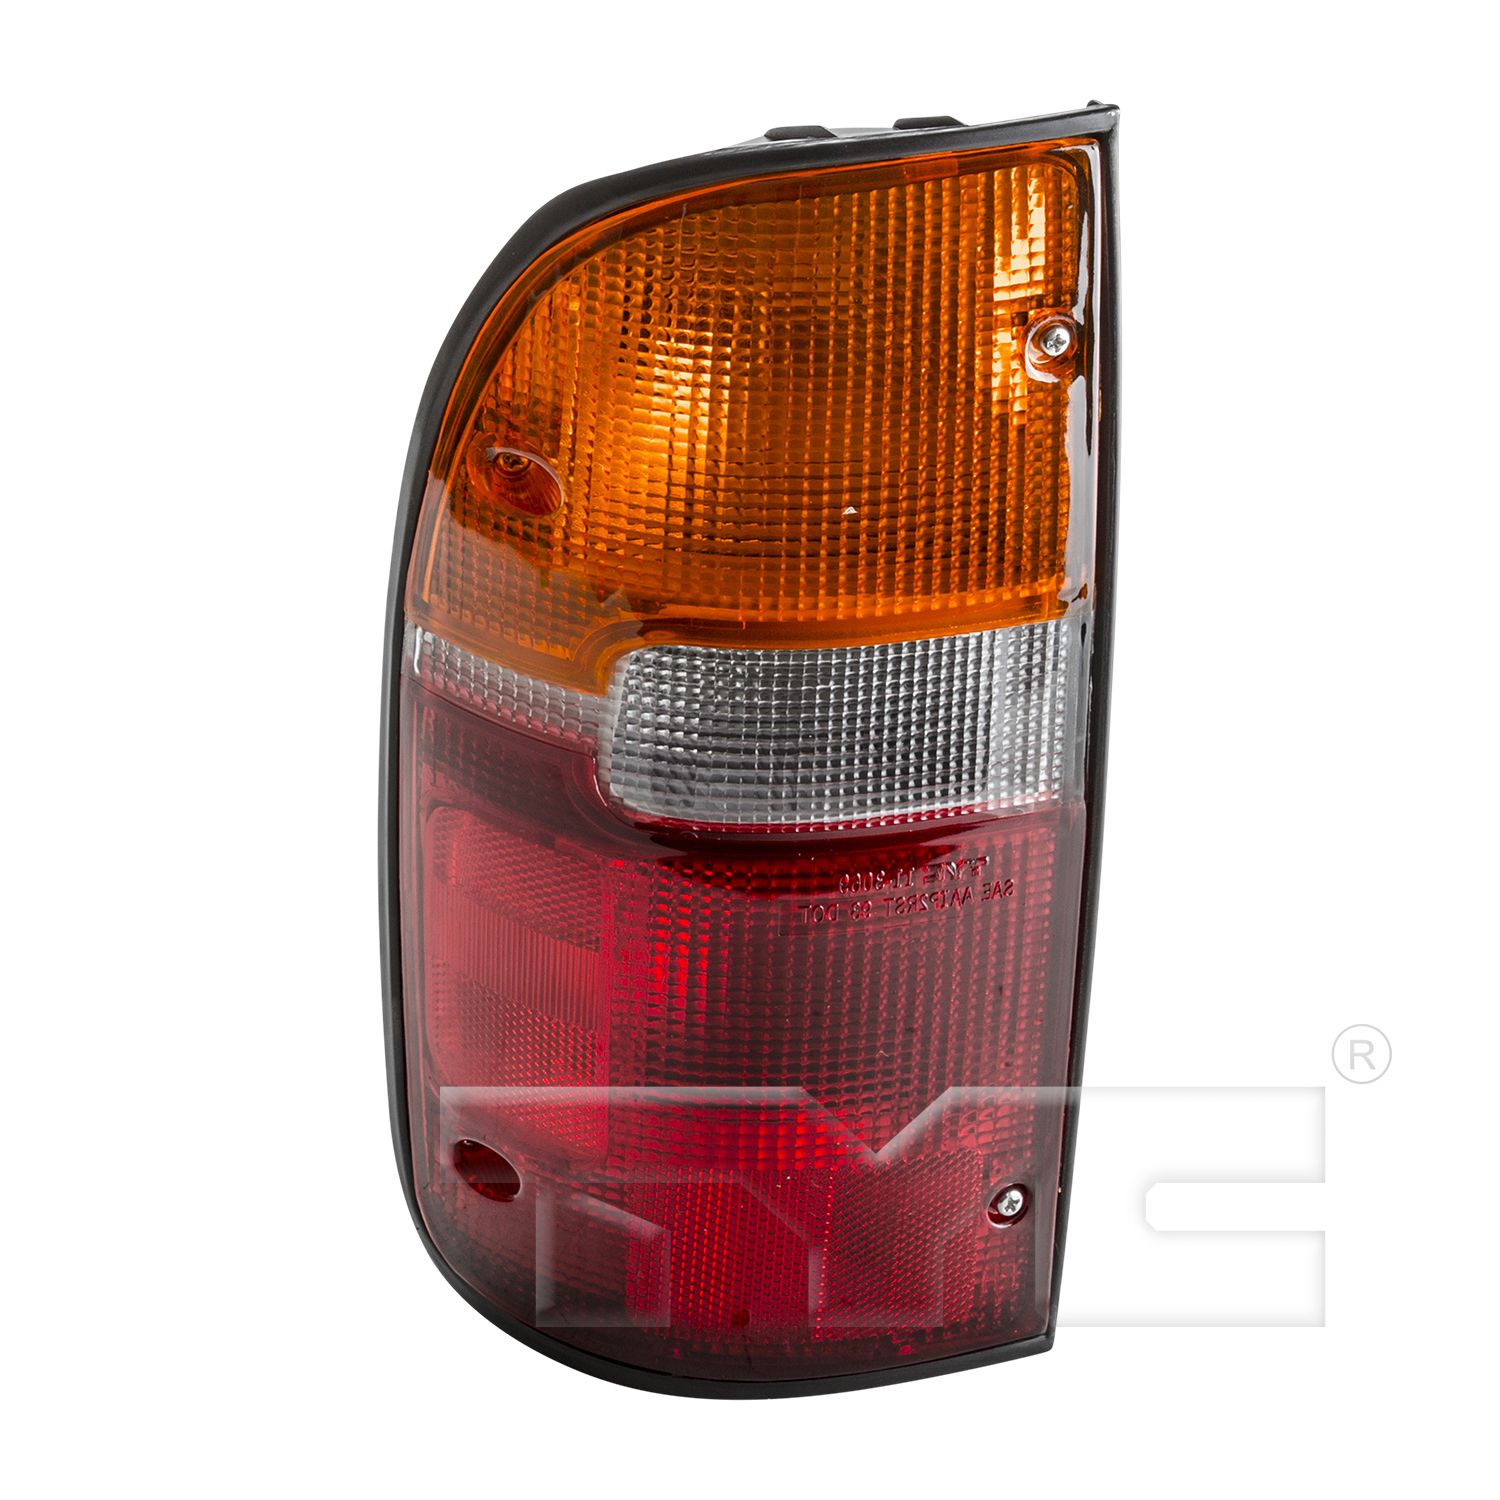 Aftermarket TAILLIGHTS for TOYOTA - TACOMA, TACOMA,95-00,LT Taillamp assy